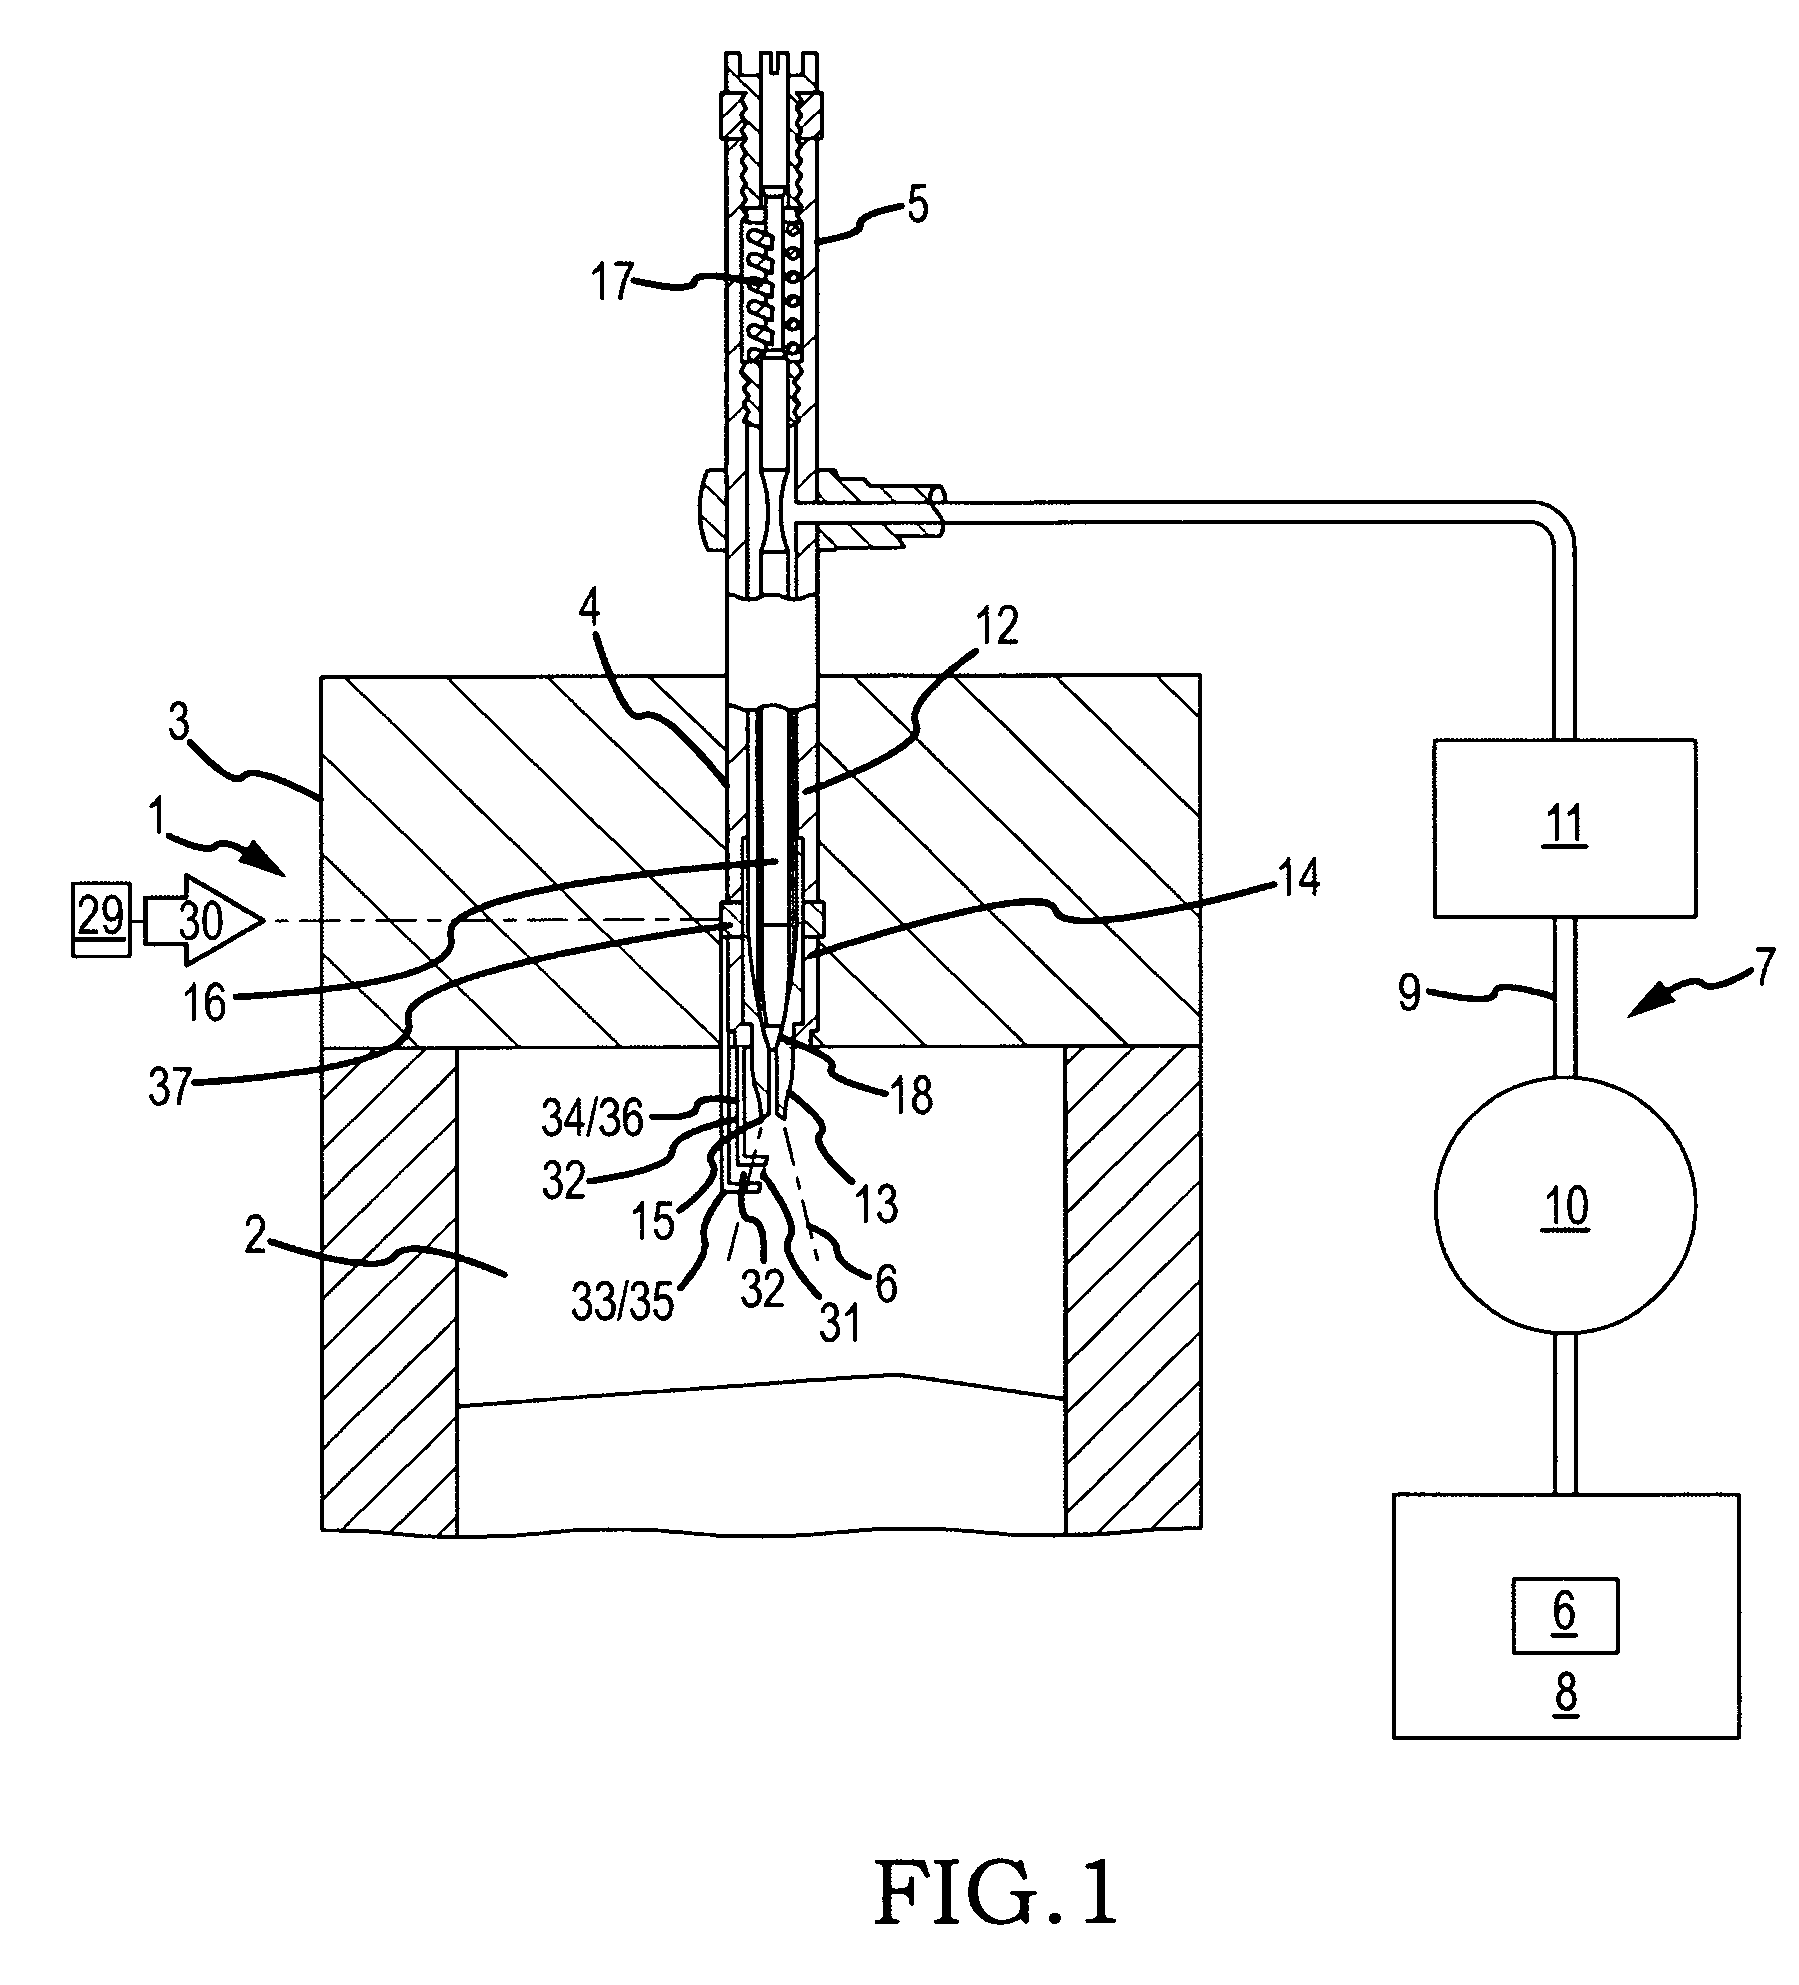 Fuel injection stream parallel opposed multiple electrode spark gap for fuel injector